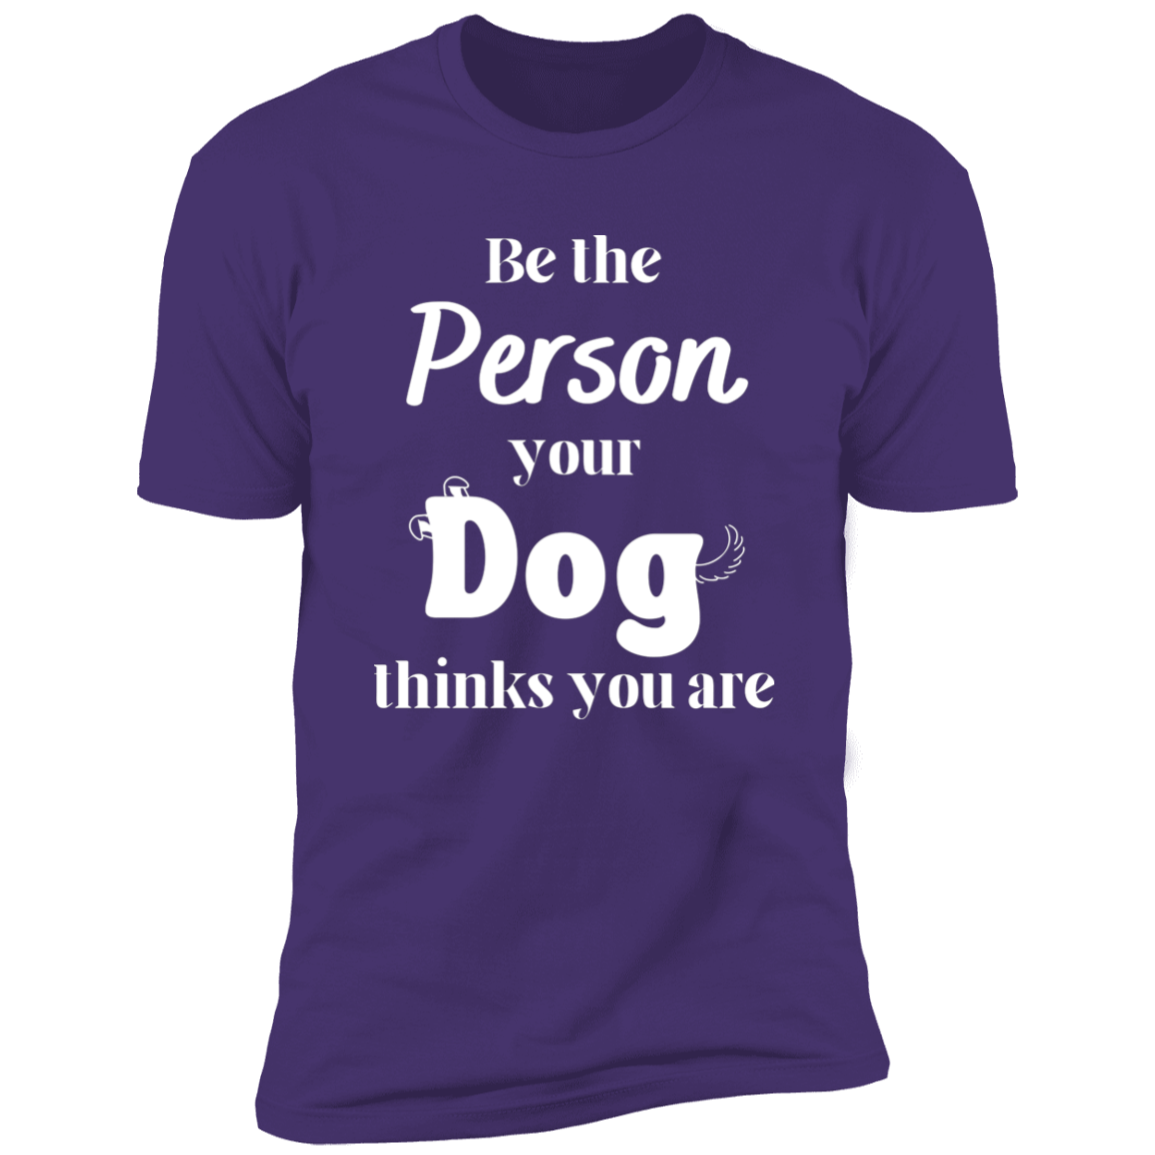 Be the Person Your Dog Thinks You Are T-shirt, Dog Shirt for humans, in purple rush